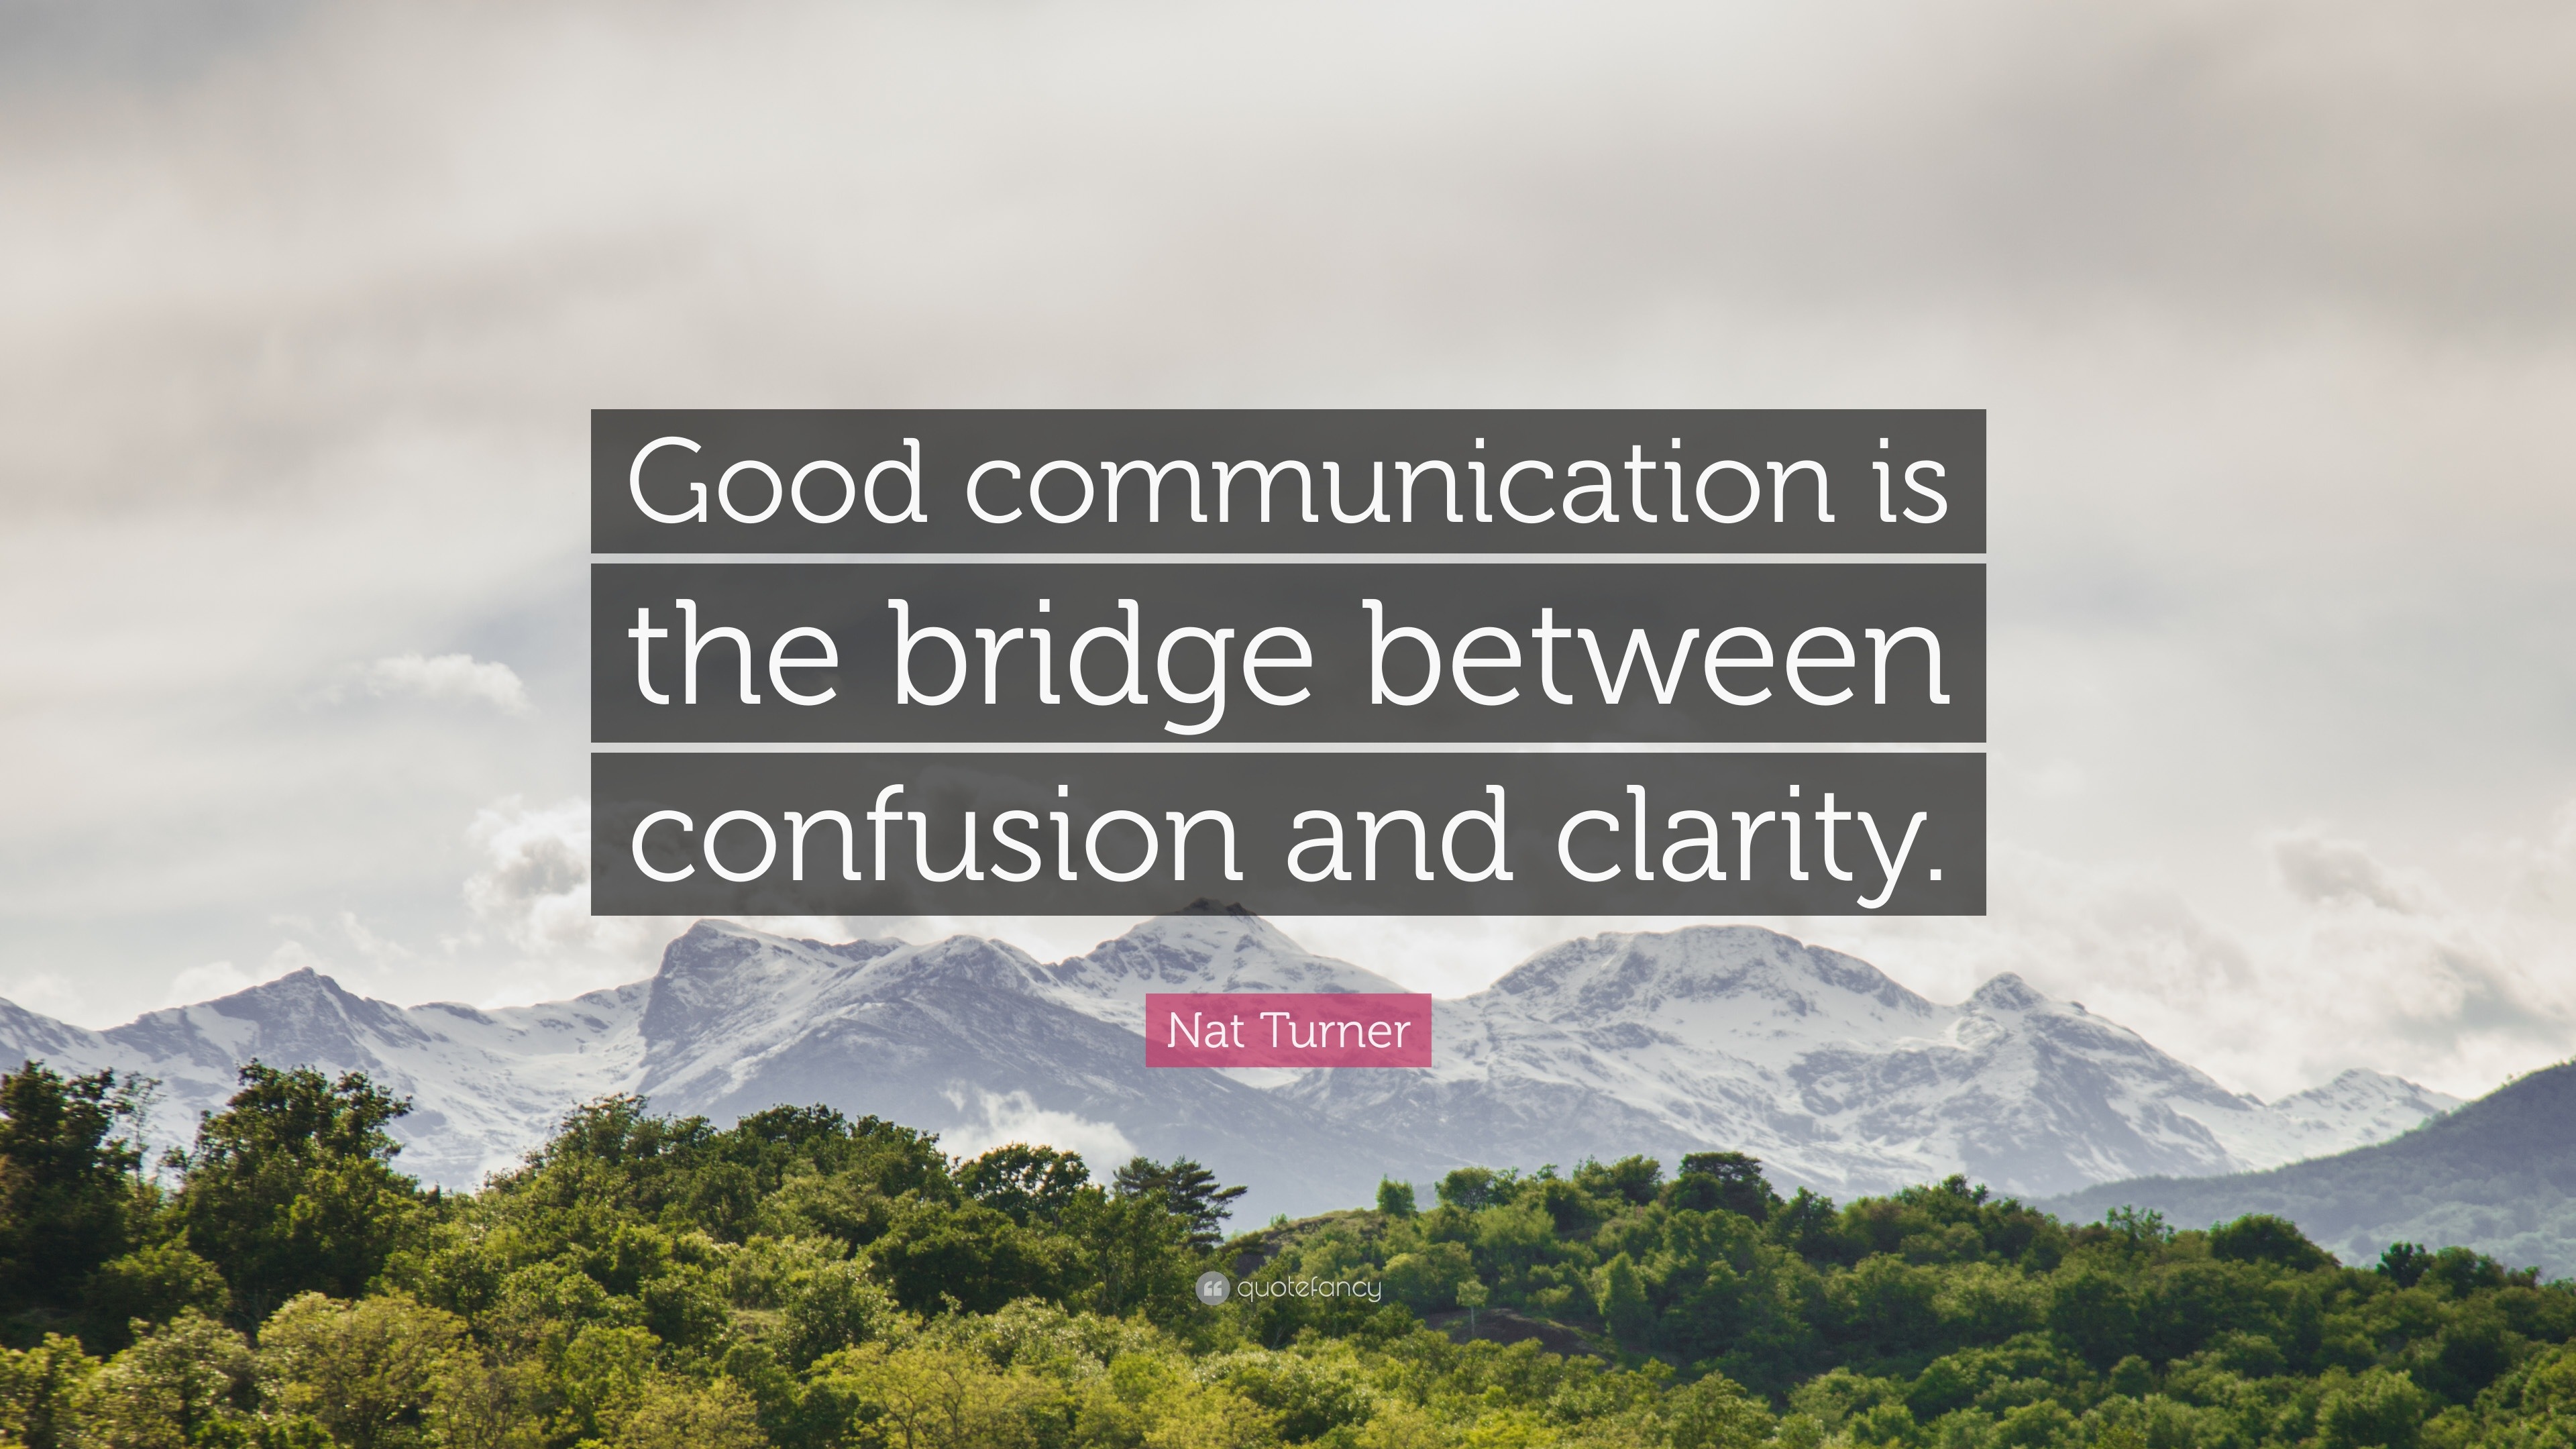 Top 40 Communication Quotes (2023 Update) - Quotefancy